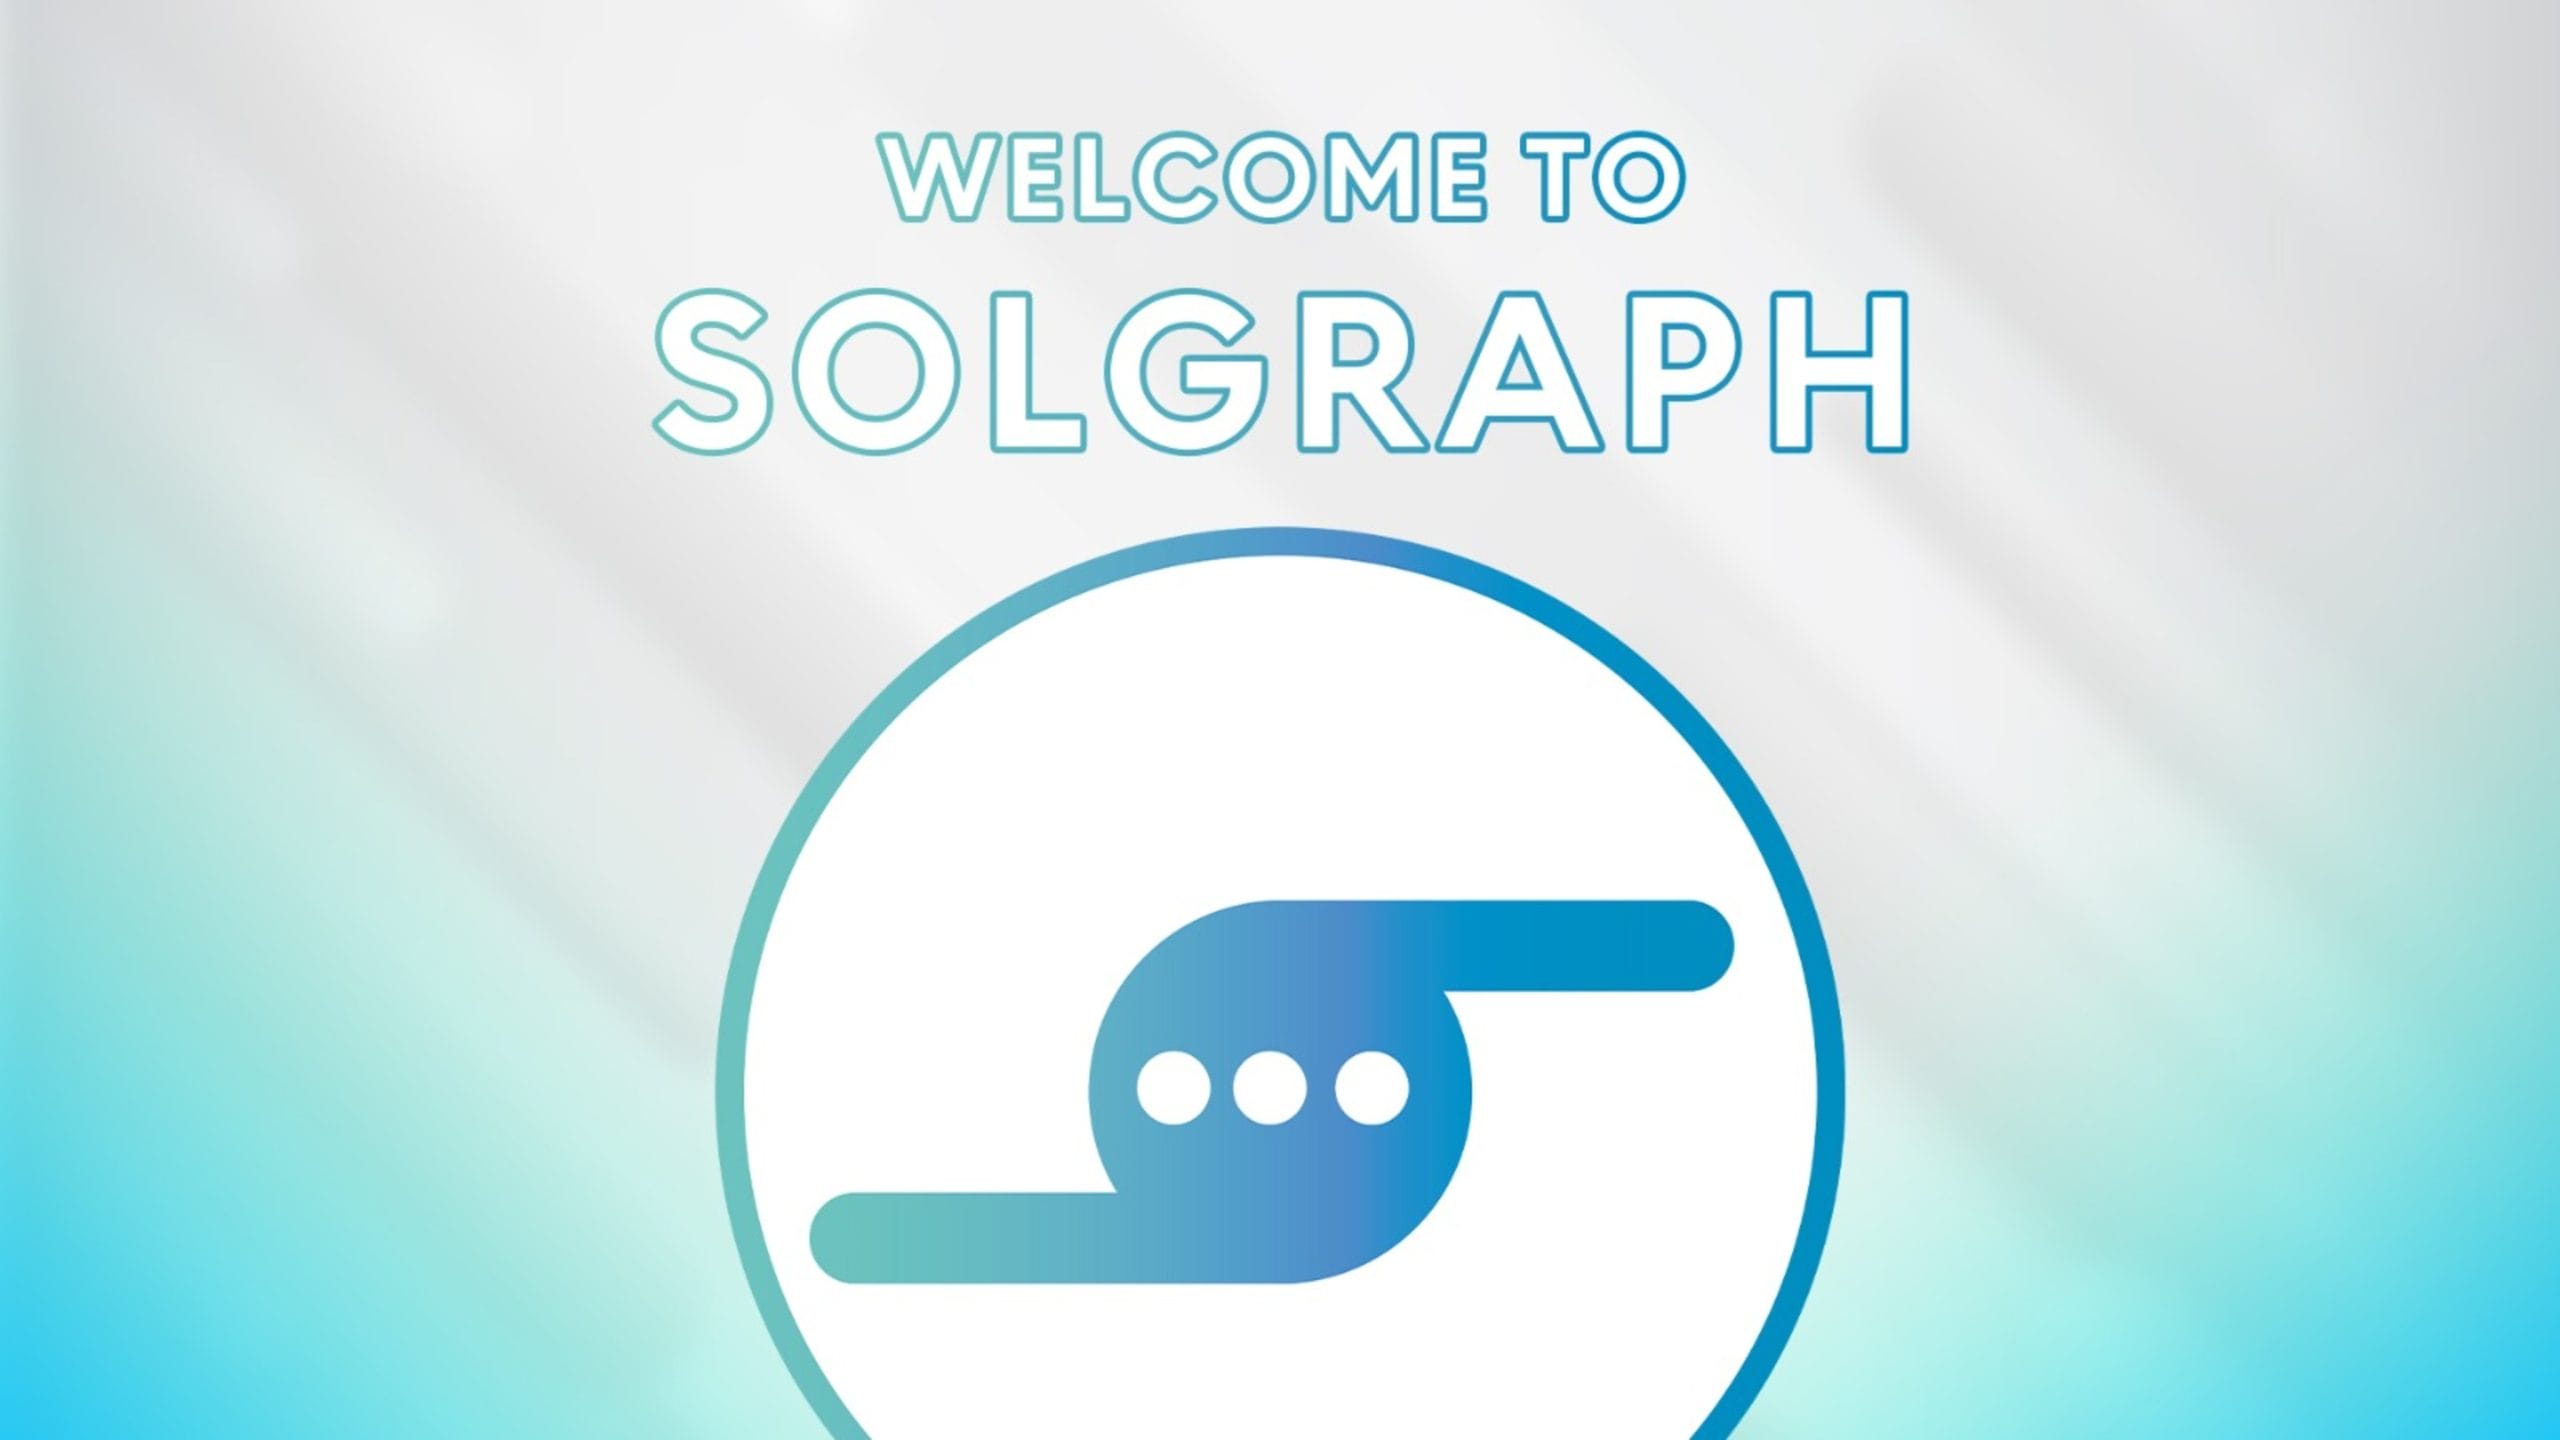 In latest Solana meme coin skyrocket, new SOLGraph (GRAPH token) has exploded overnight - and this other new dogecoin could be next.